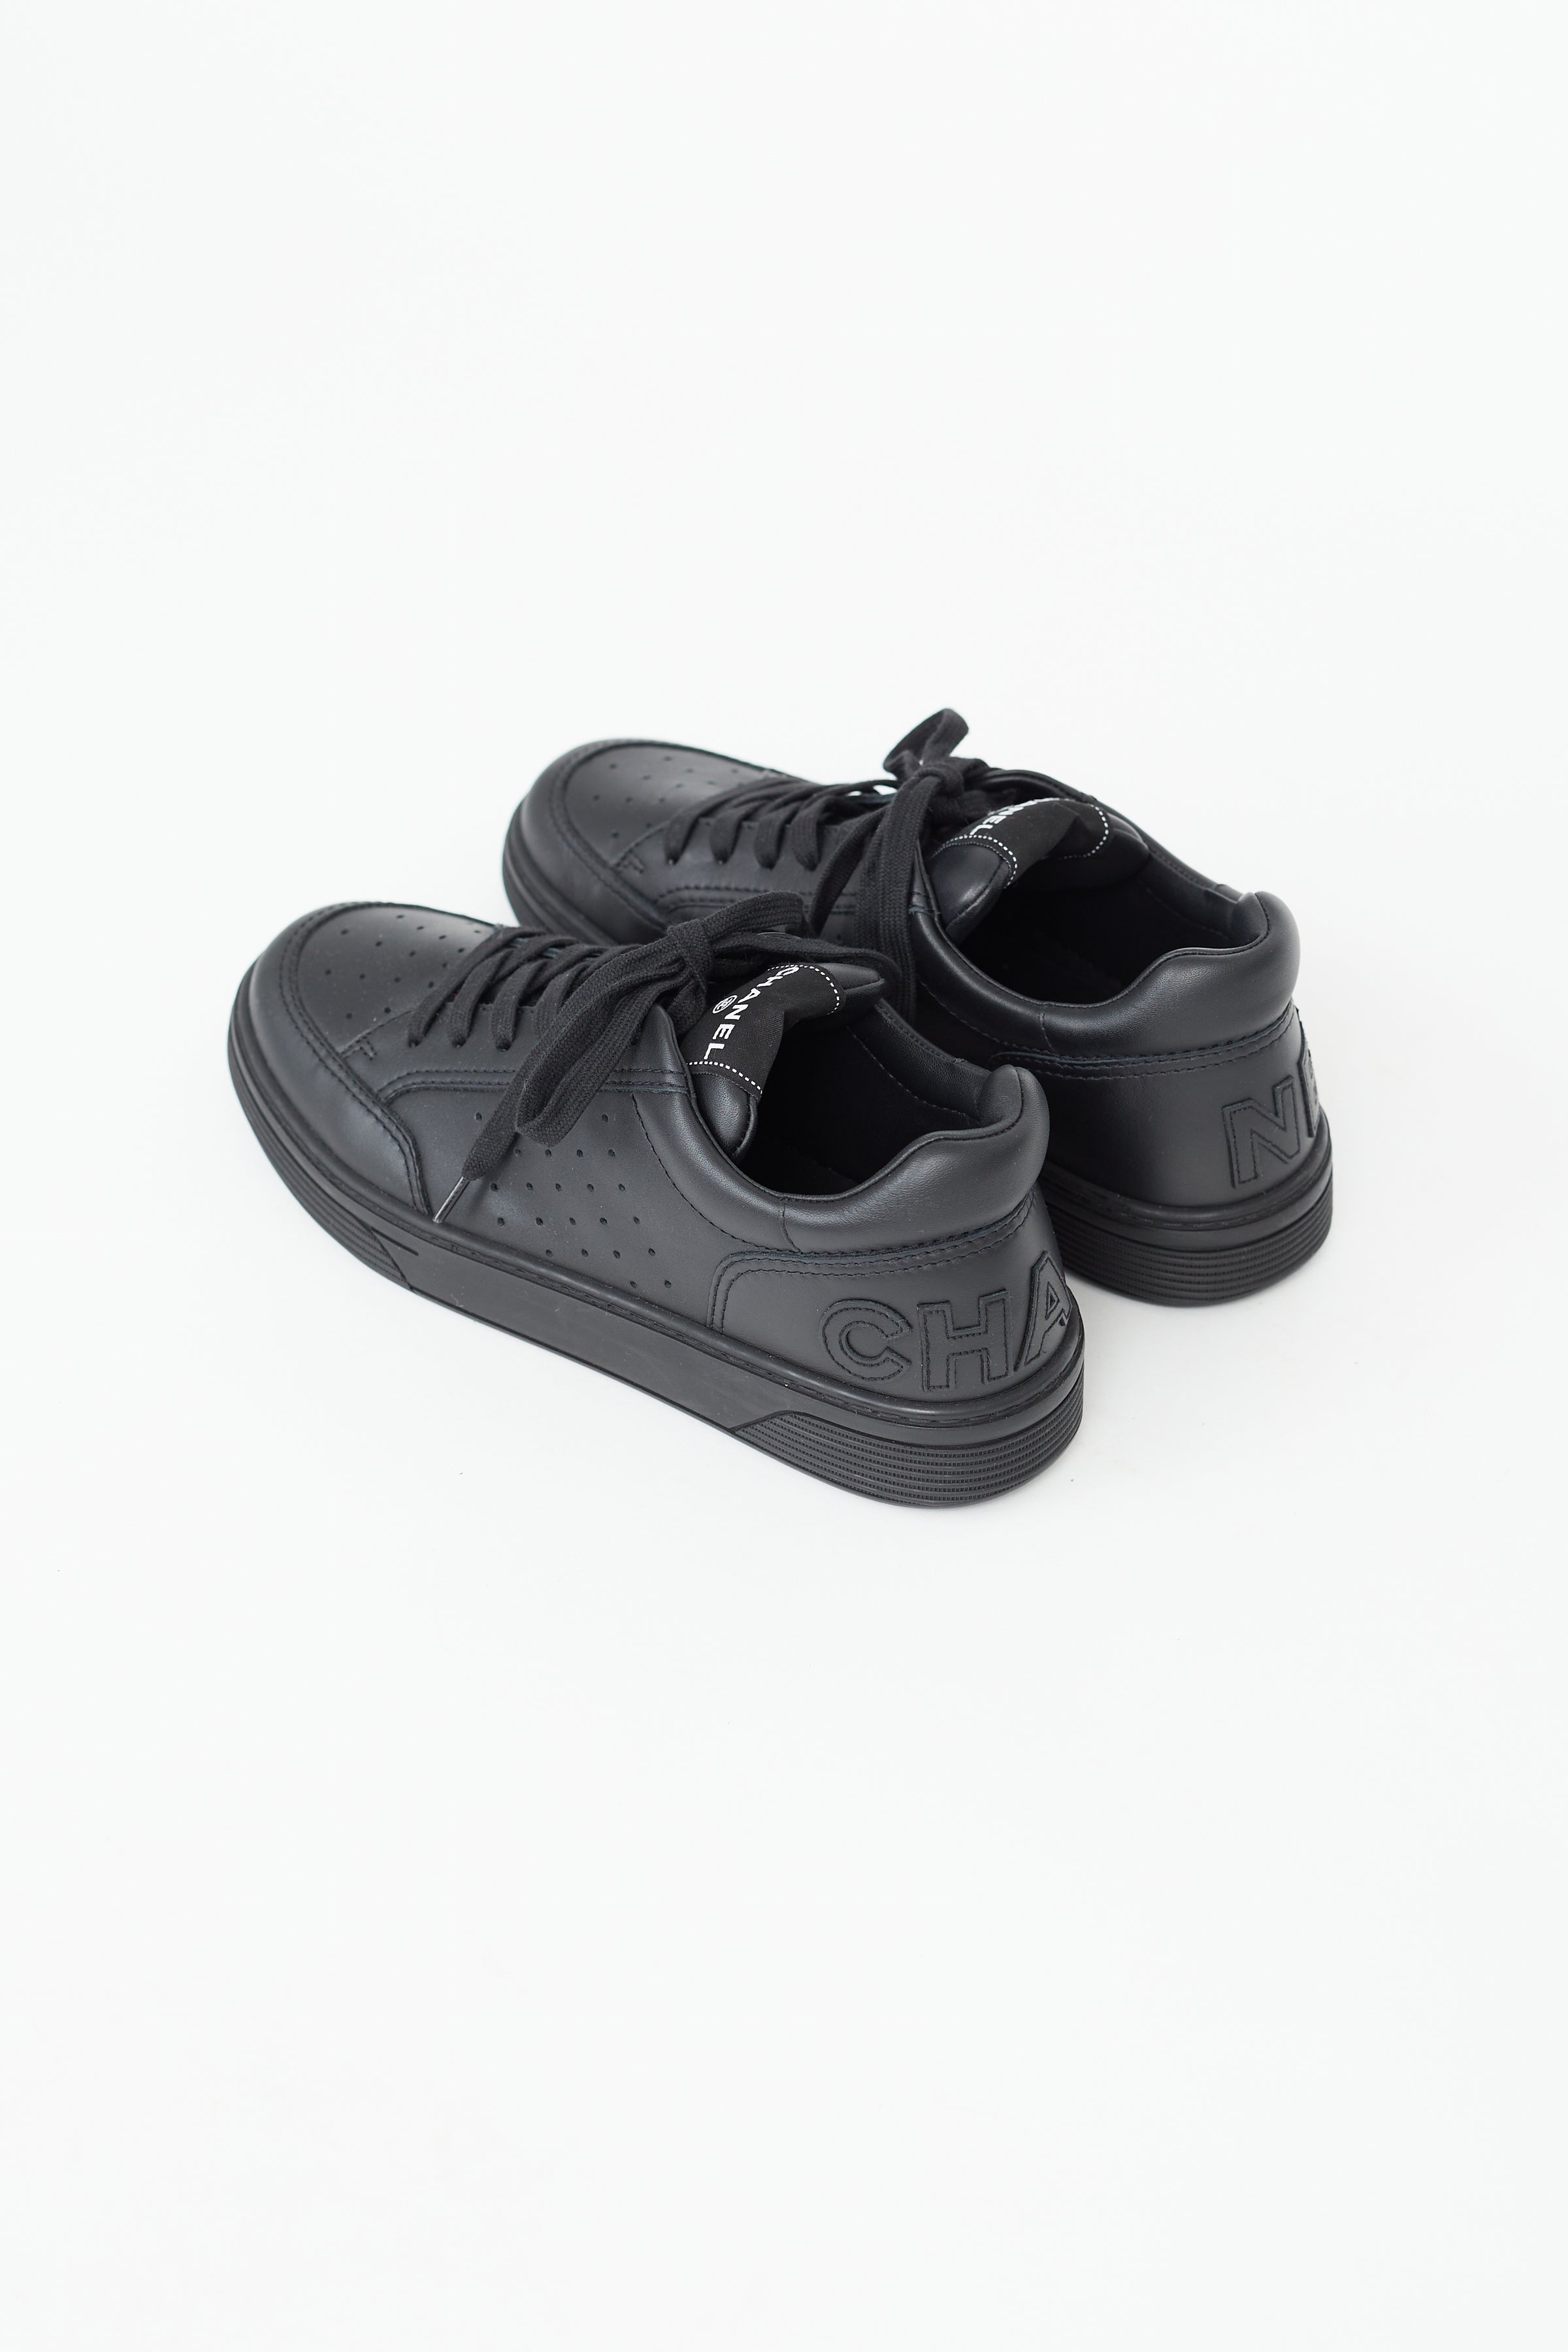 Chanel // Black Leather Logo Sneaker – VSP Consignment